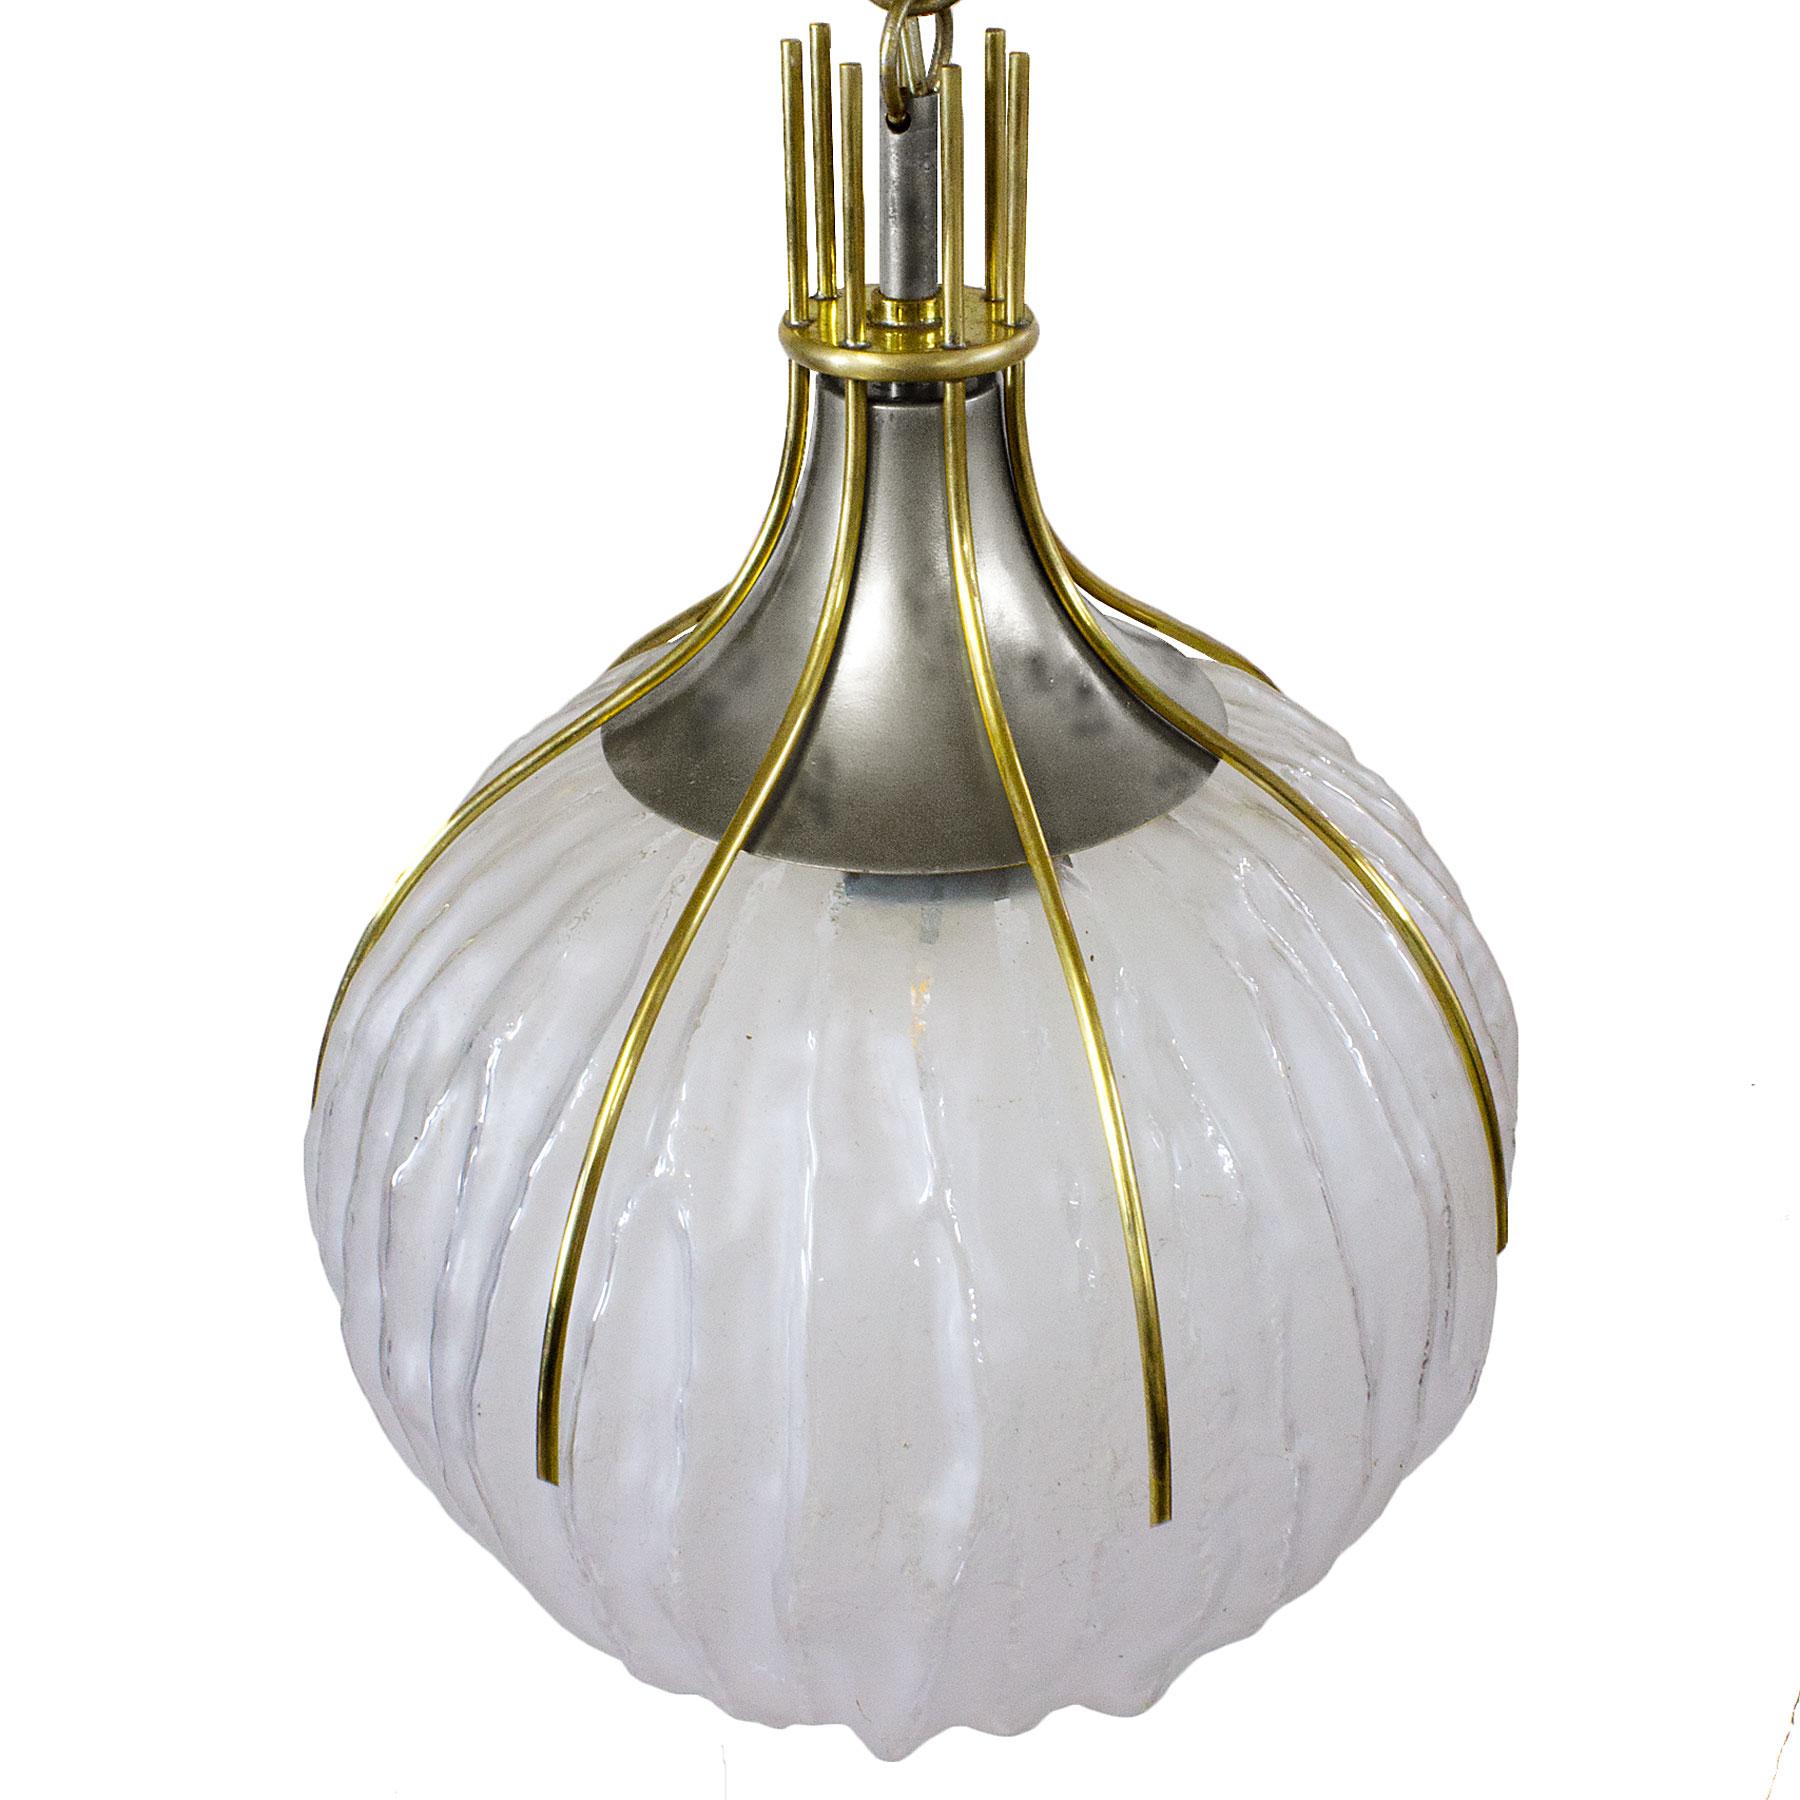 Hanging lantern, moulded acid etched glass ball, holded by six polished brass claw feet with a golden chain links and wire cover.

Manufacturer: Esperia

Italy, circa 1950.